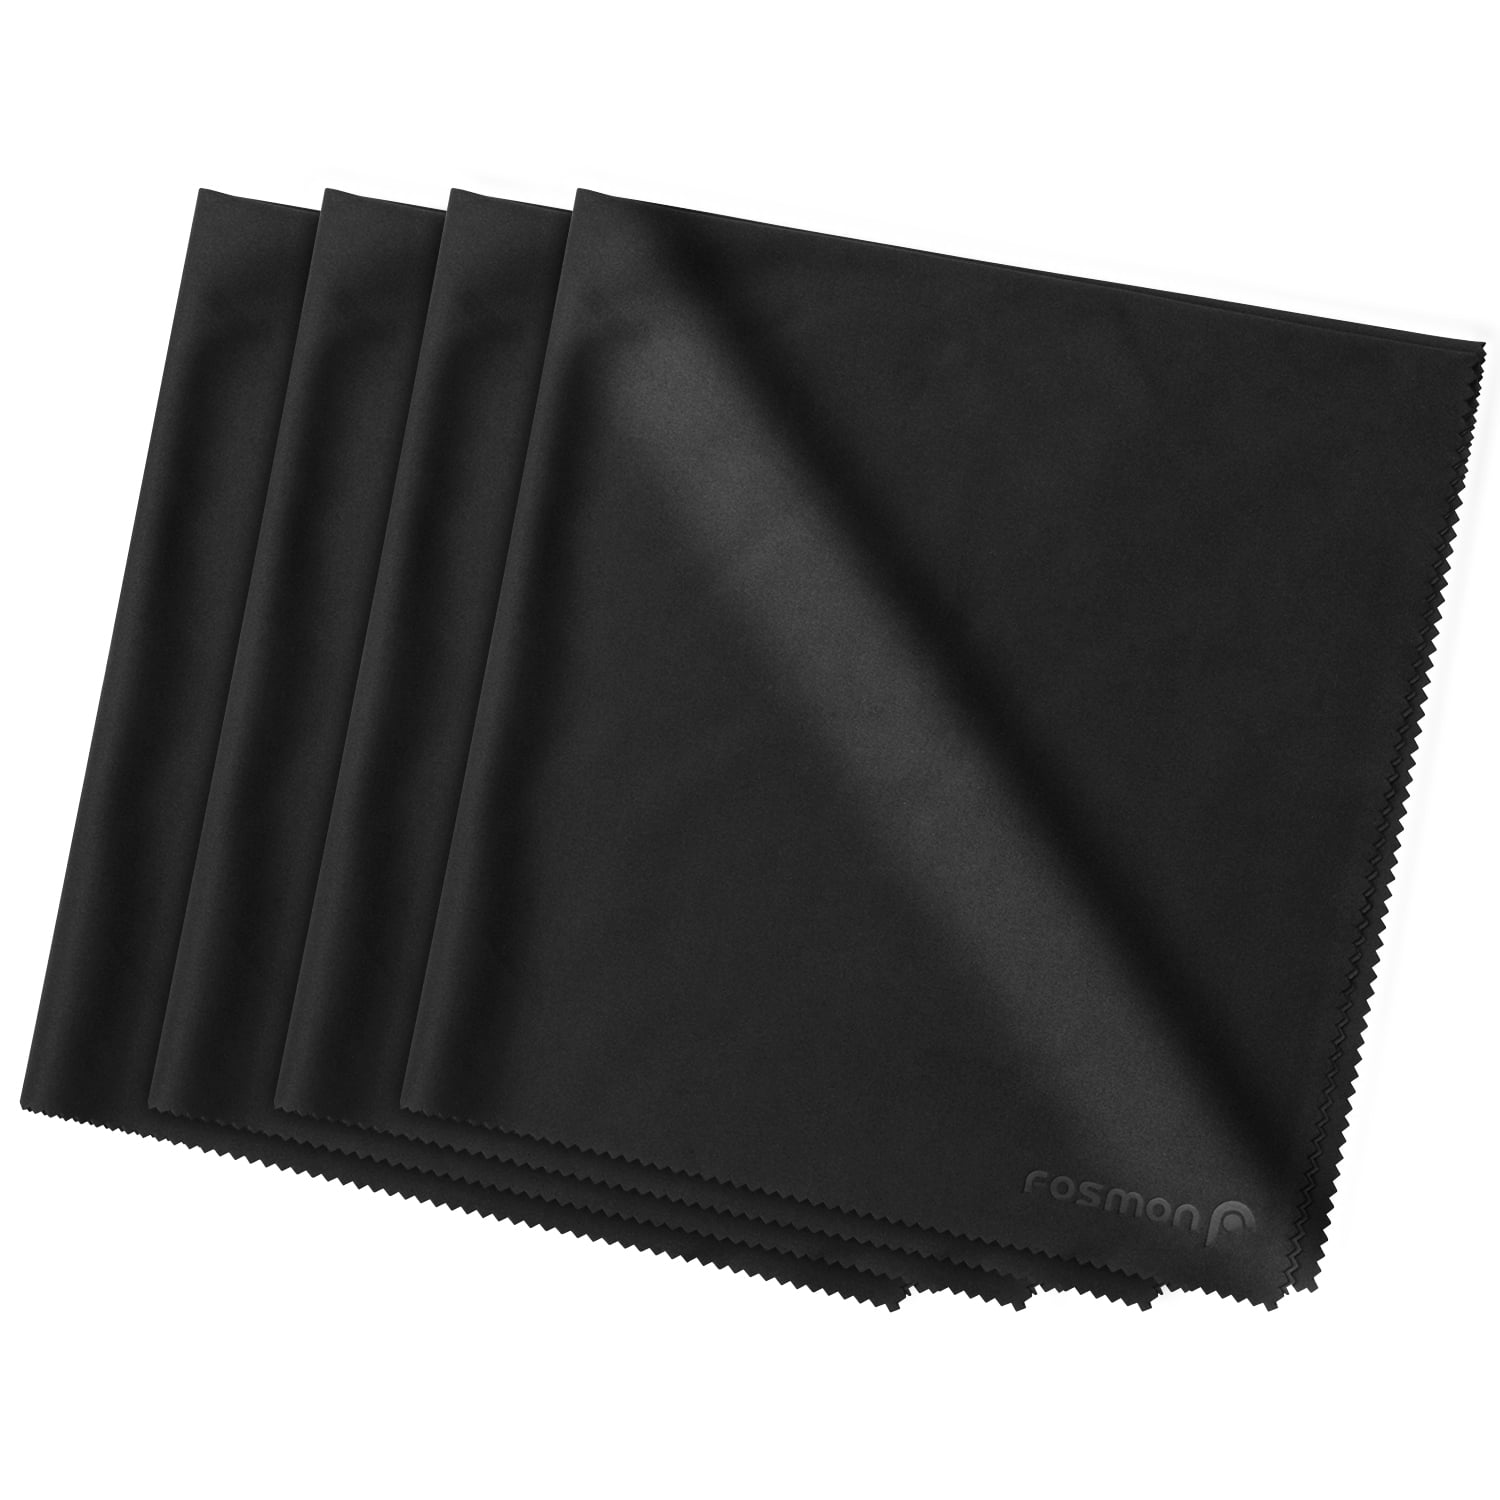  Microfiber Cleaning Cloth 12-Pack Individually Packed (6x 7)  Glasses Cleaning Cloths for Eyeglasses Phone Computer Screen Laptop Camera  Lenses (4 Black, 4 Grey, 4 White) : Health & Household